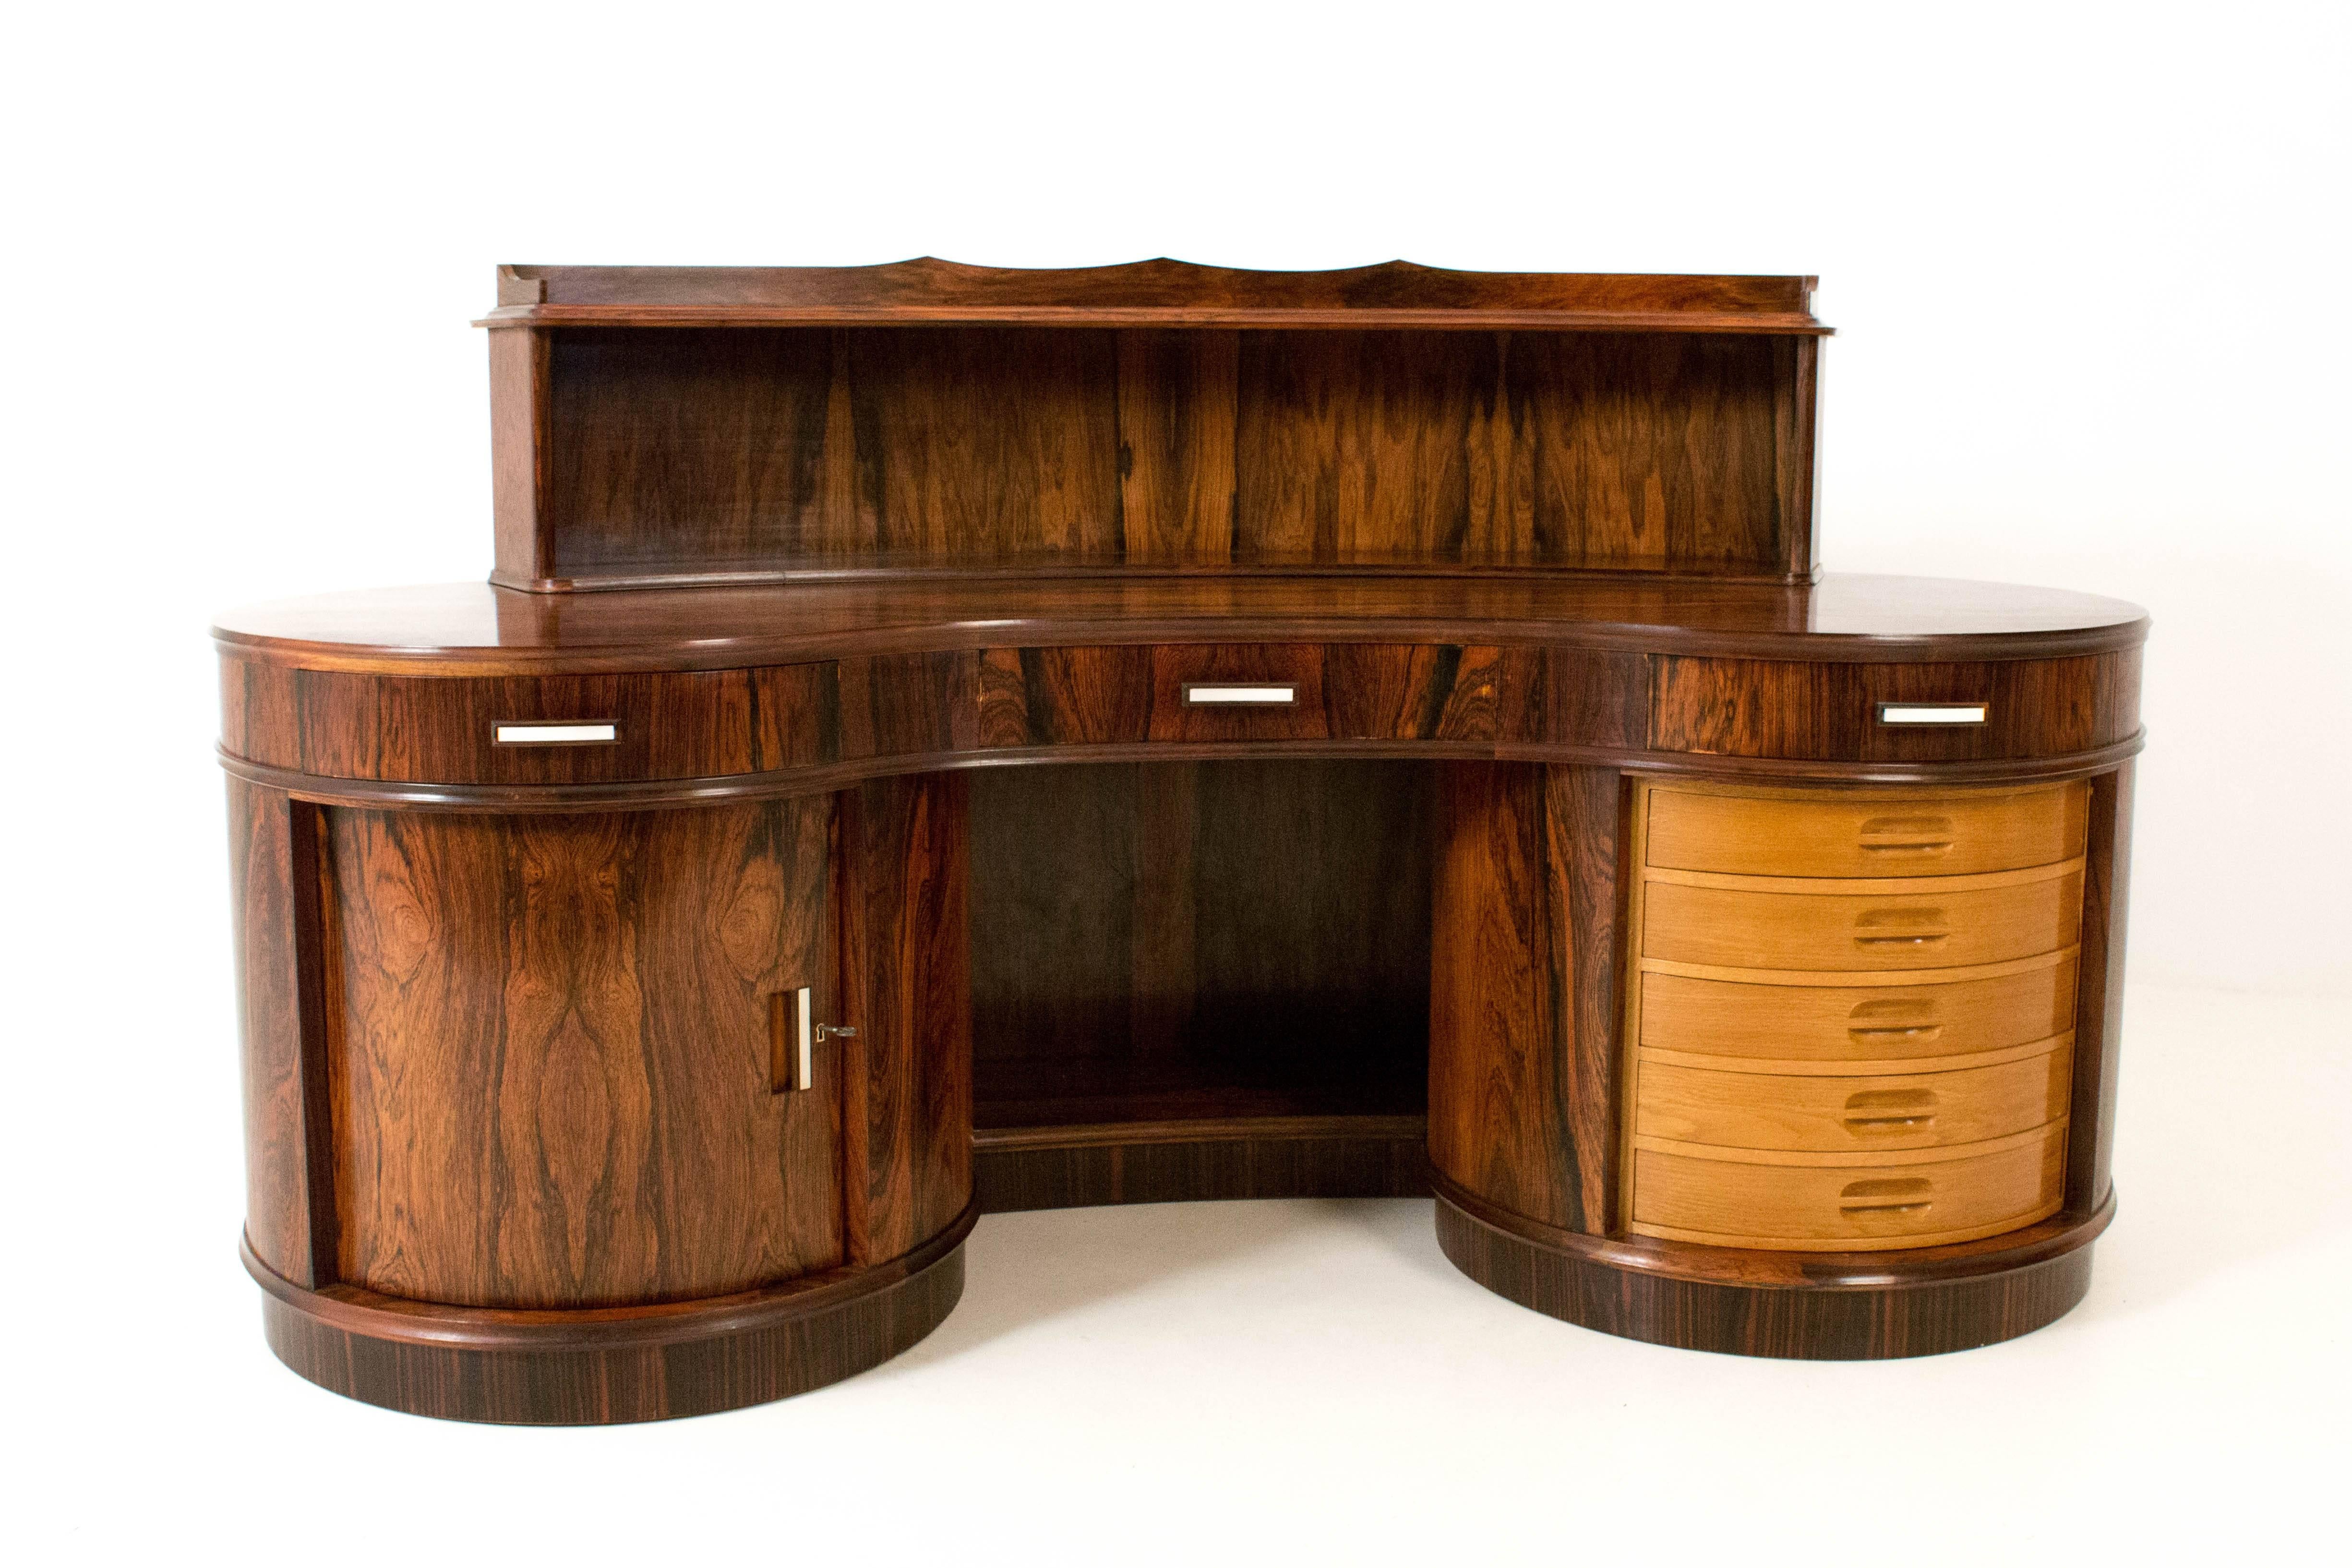 Magnificent Art Deco Kidney Shaped Desk with Armchair by Reens Amsterdam 1